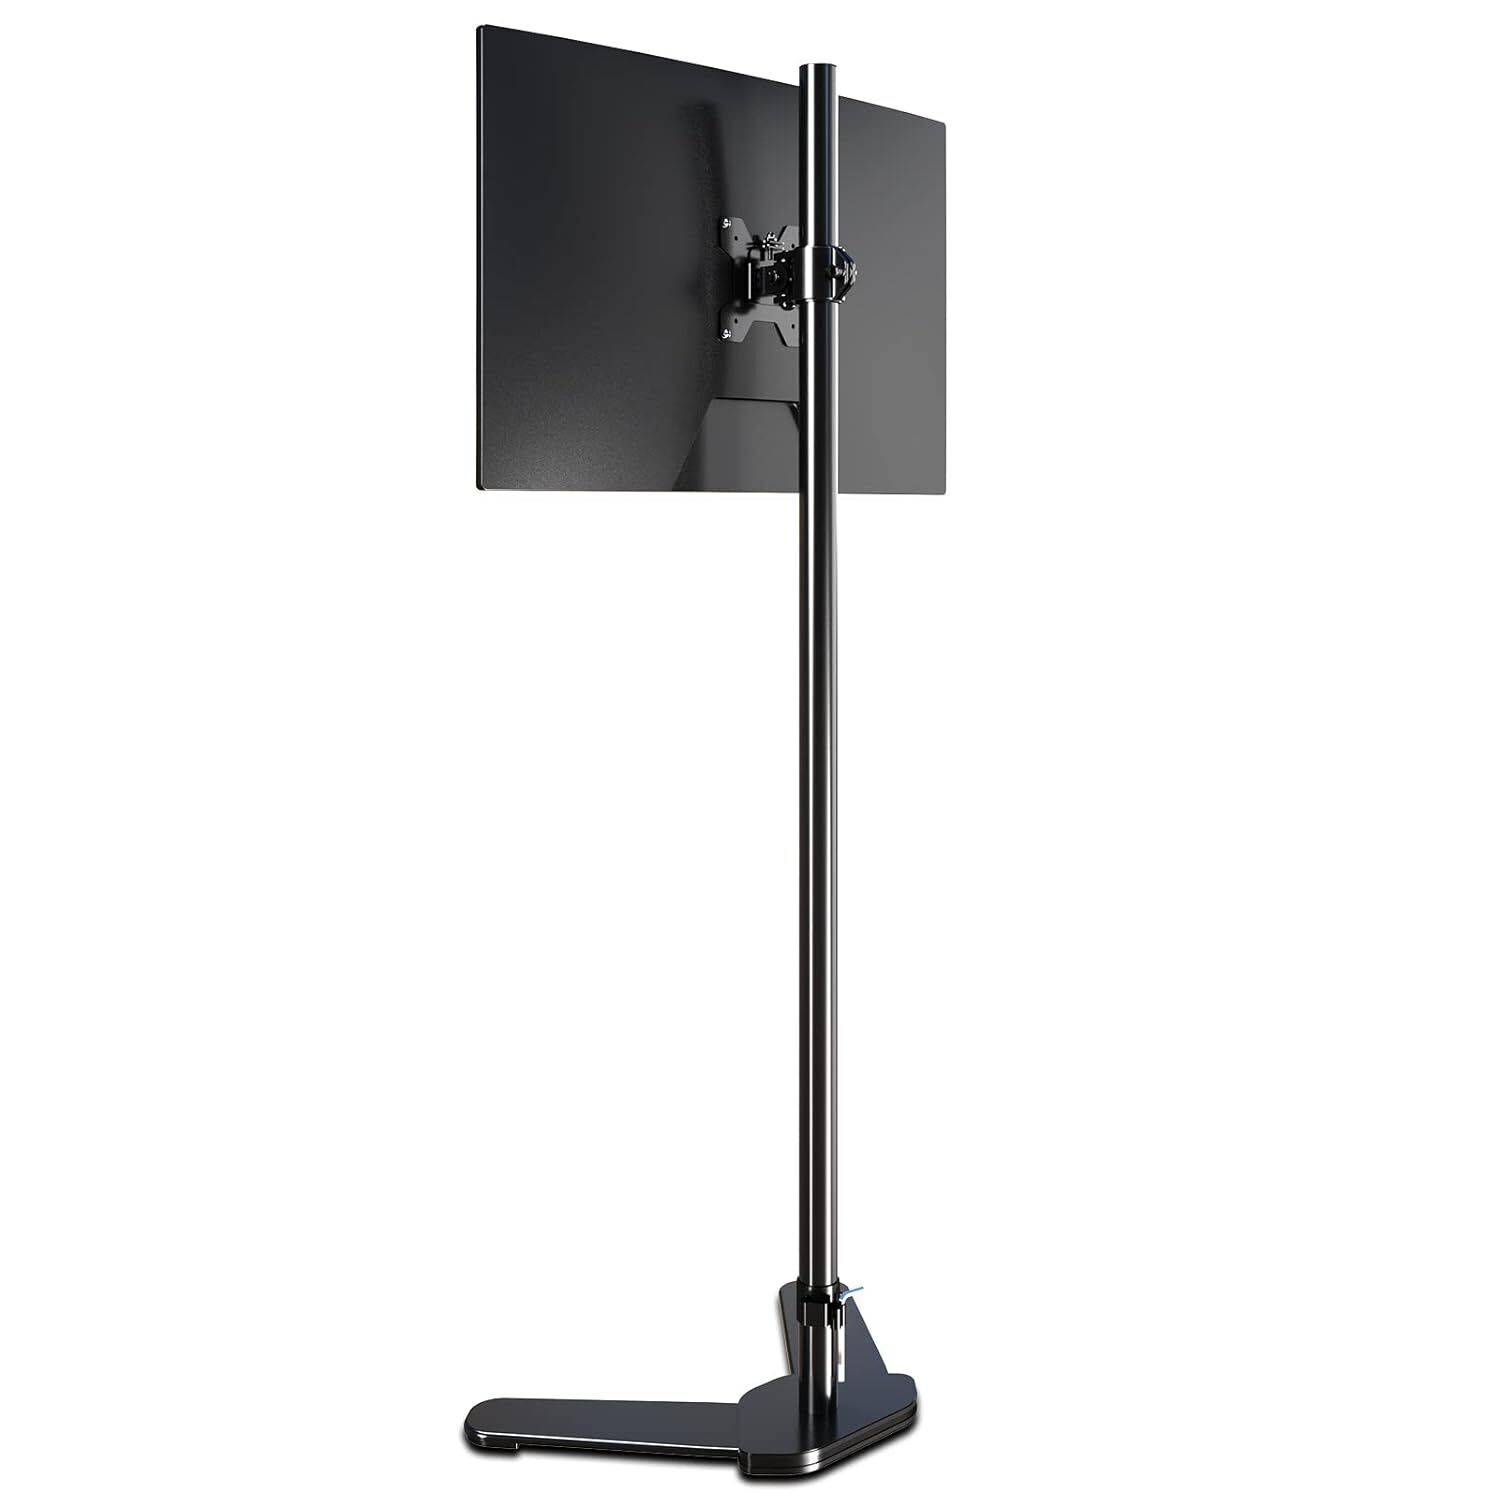 Single Monitor Mount, Extra Long Monitor Stand, 47 Inch Pole Black Stand, Moni